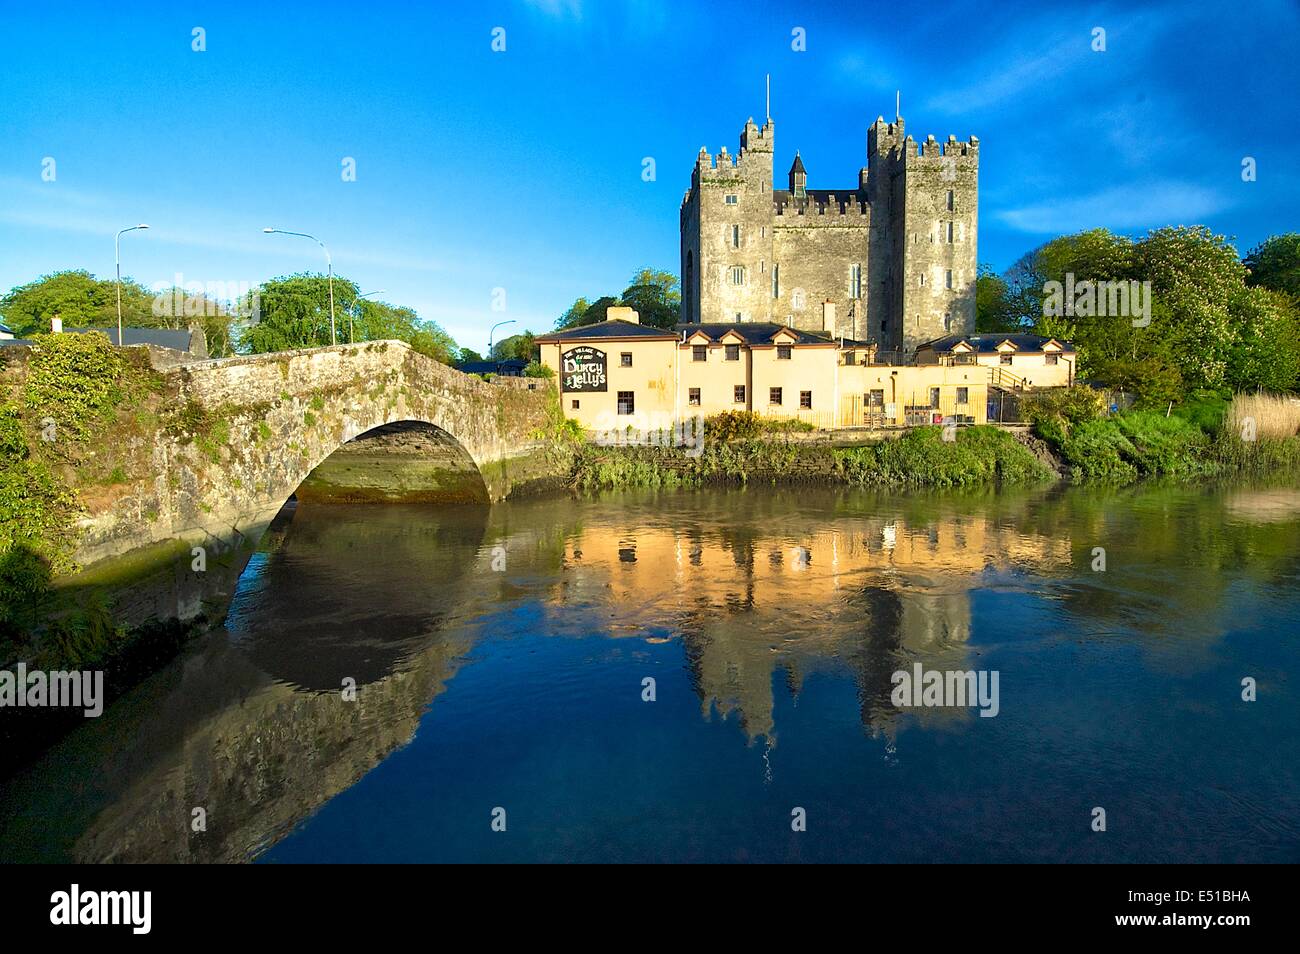 Europe Ireland County Clare Bunratty Castle and Durty Nelly’s traditional public house Stock Photo